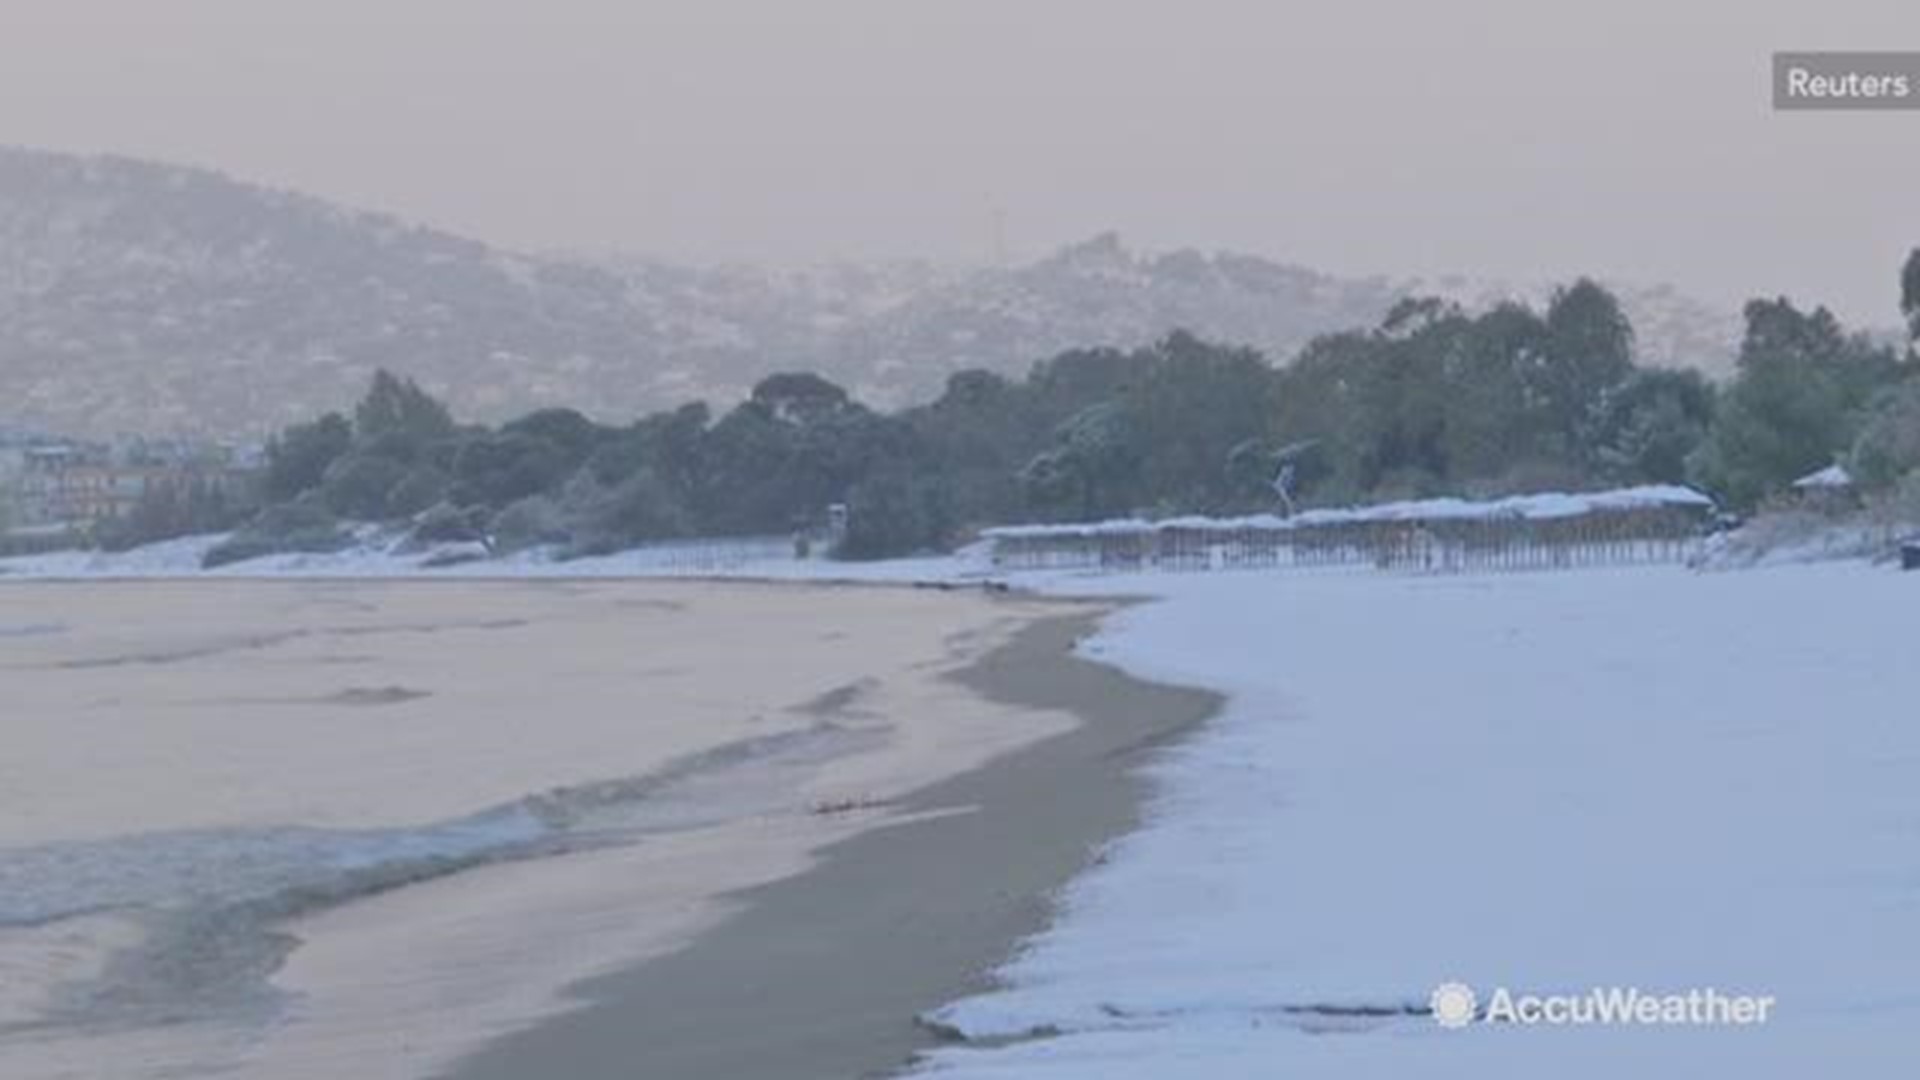 The beaches of Athens, Greece were white on January 8th as a rare snowfall brought several inches of snow to the area.